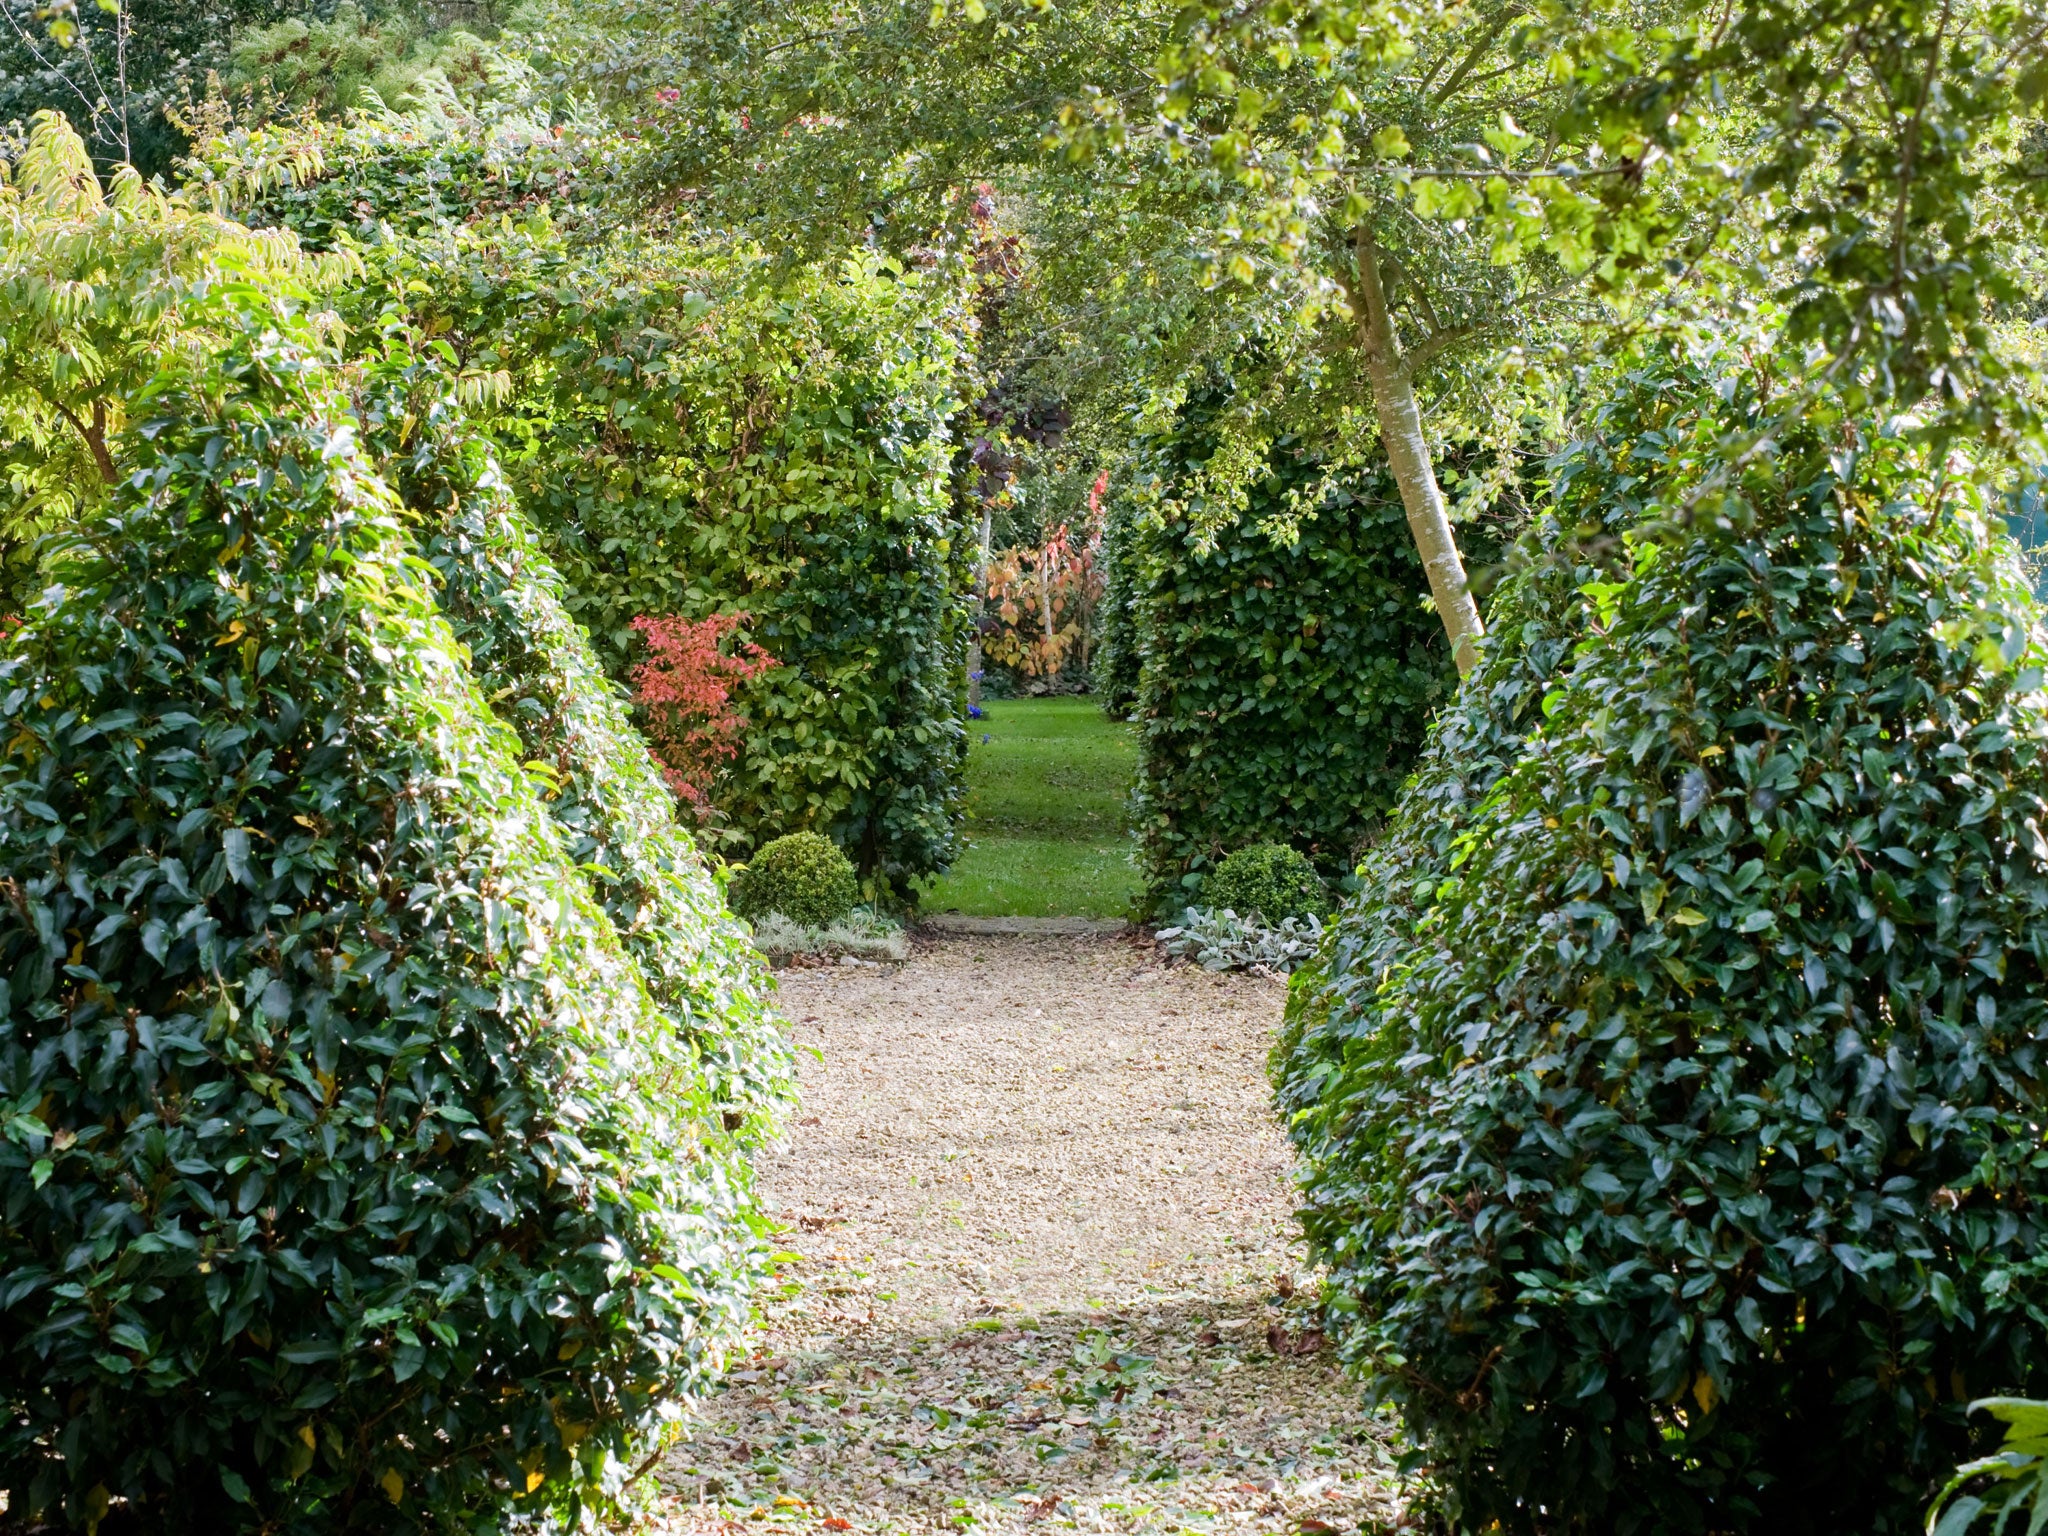 Trained bay trees, such as lollipops or these pyramids, can be clipped to shape this month or next